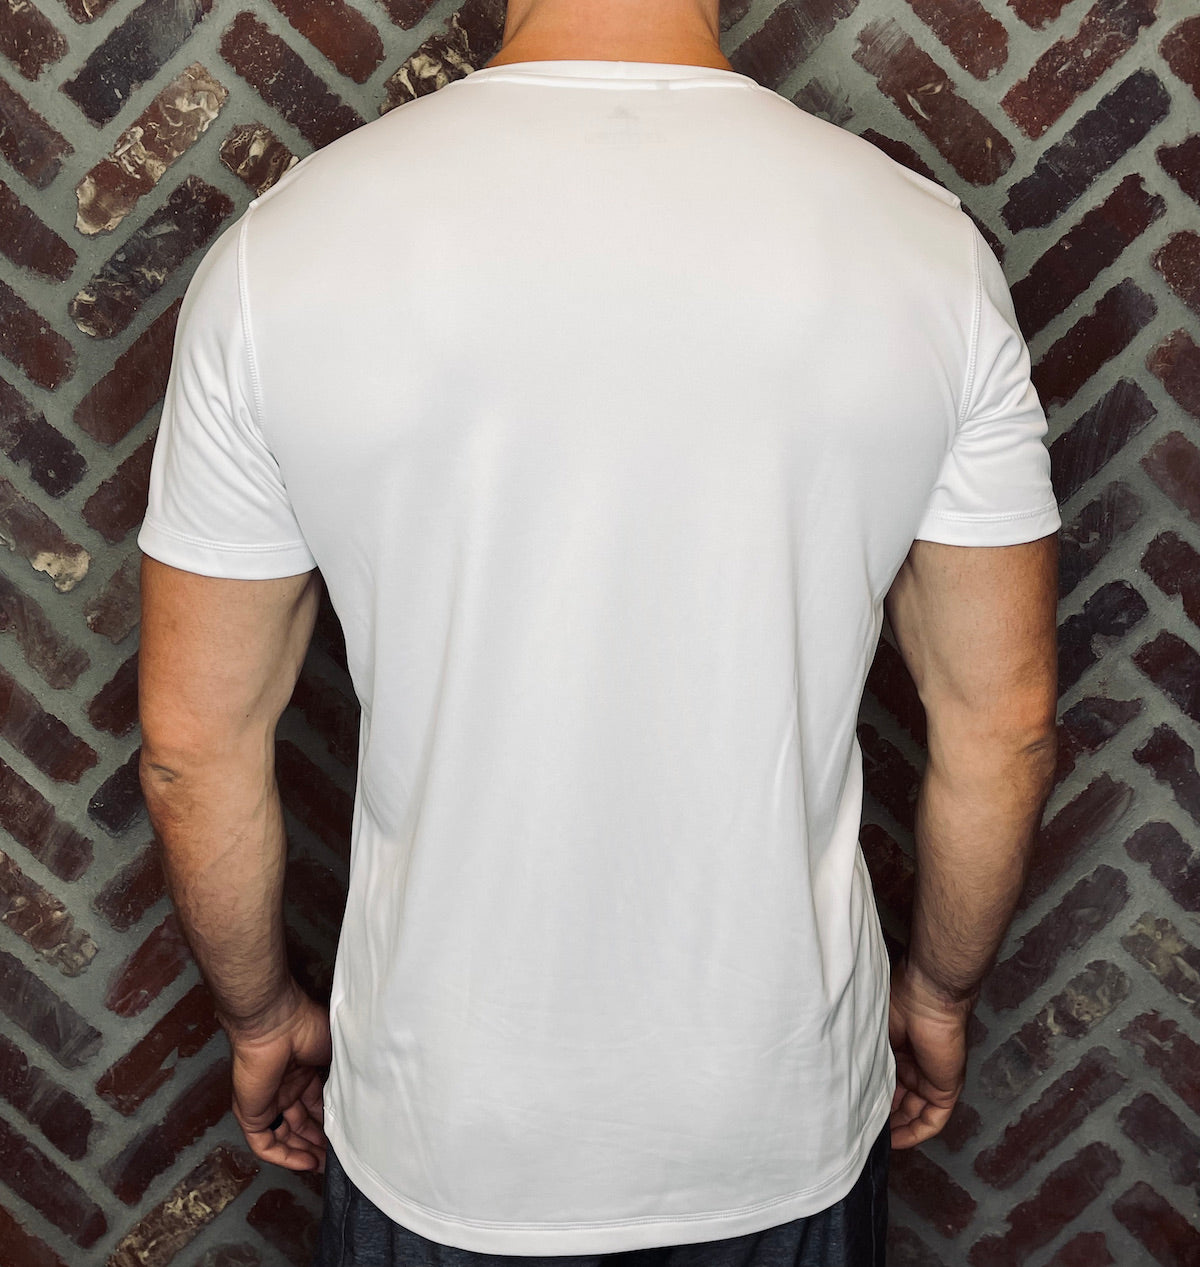 MK Supplements CARNIVORE T-Shirt in White, Back.